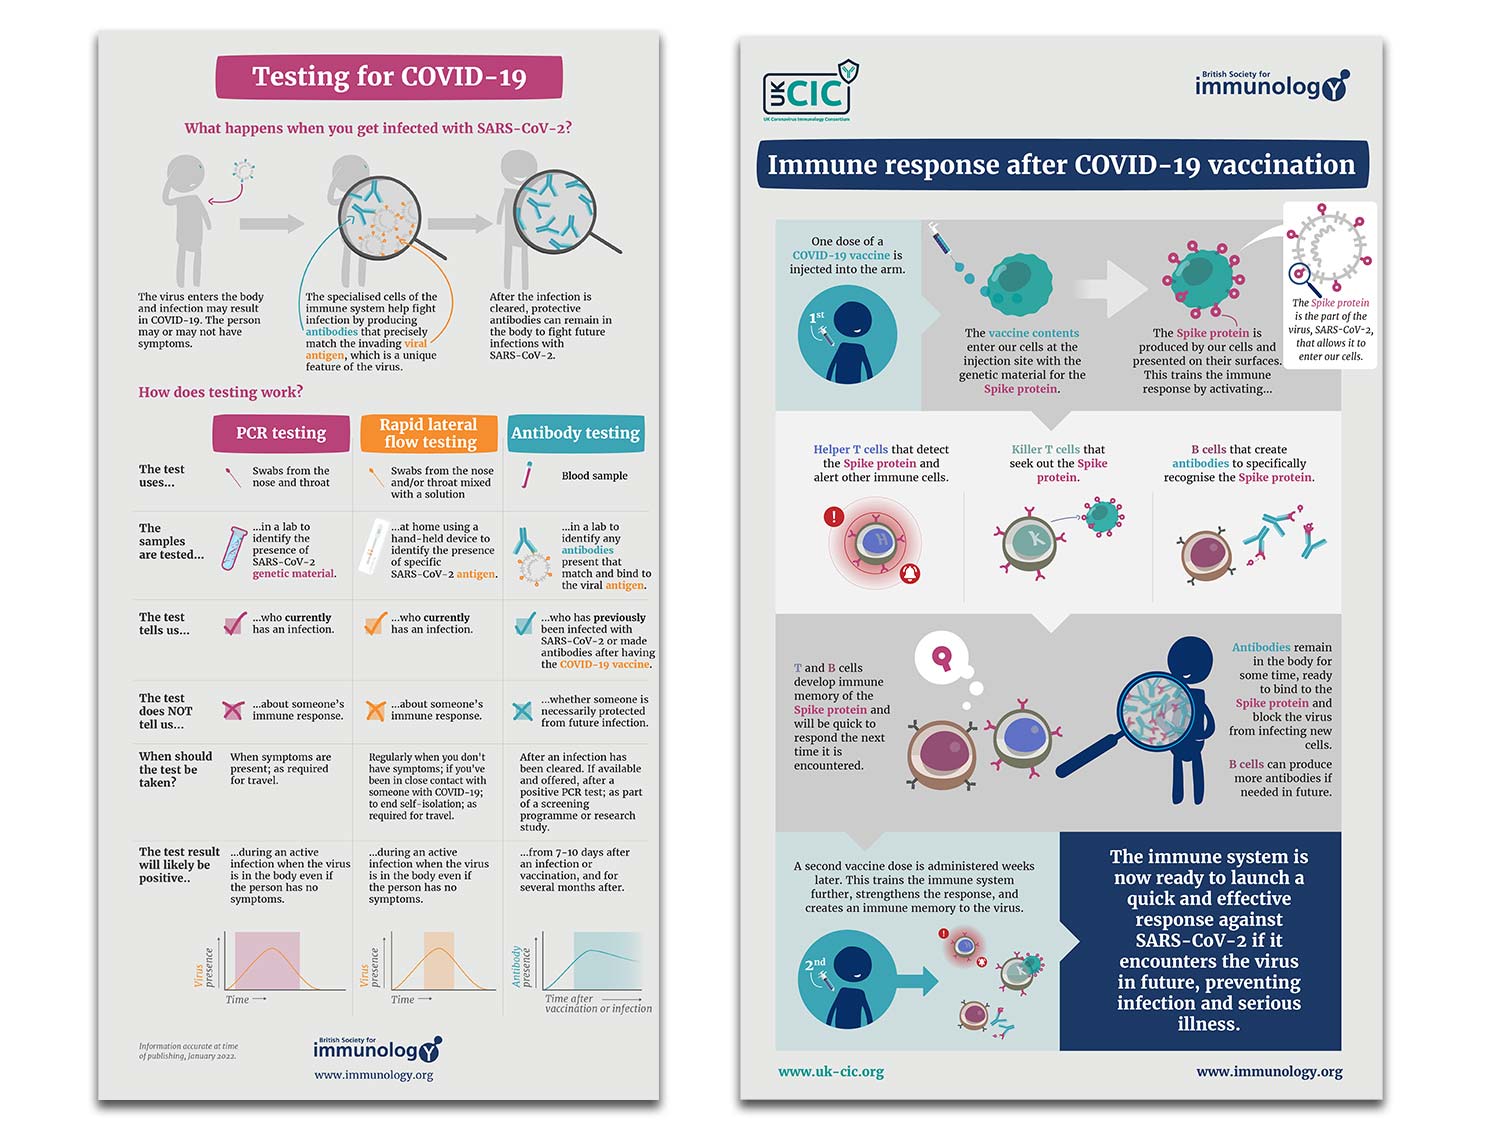 Two detailed infographics on COVID-19 testing and immune response after vaccination